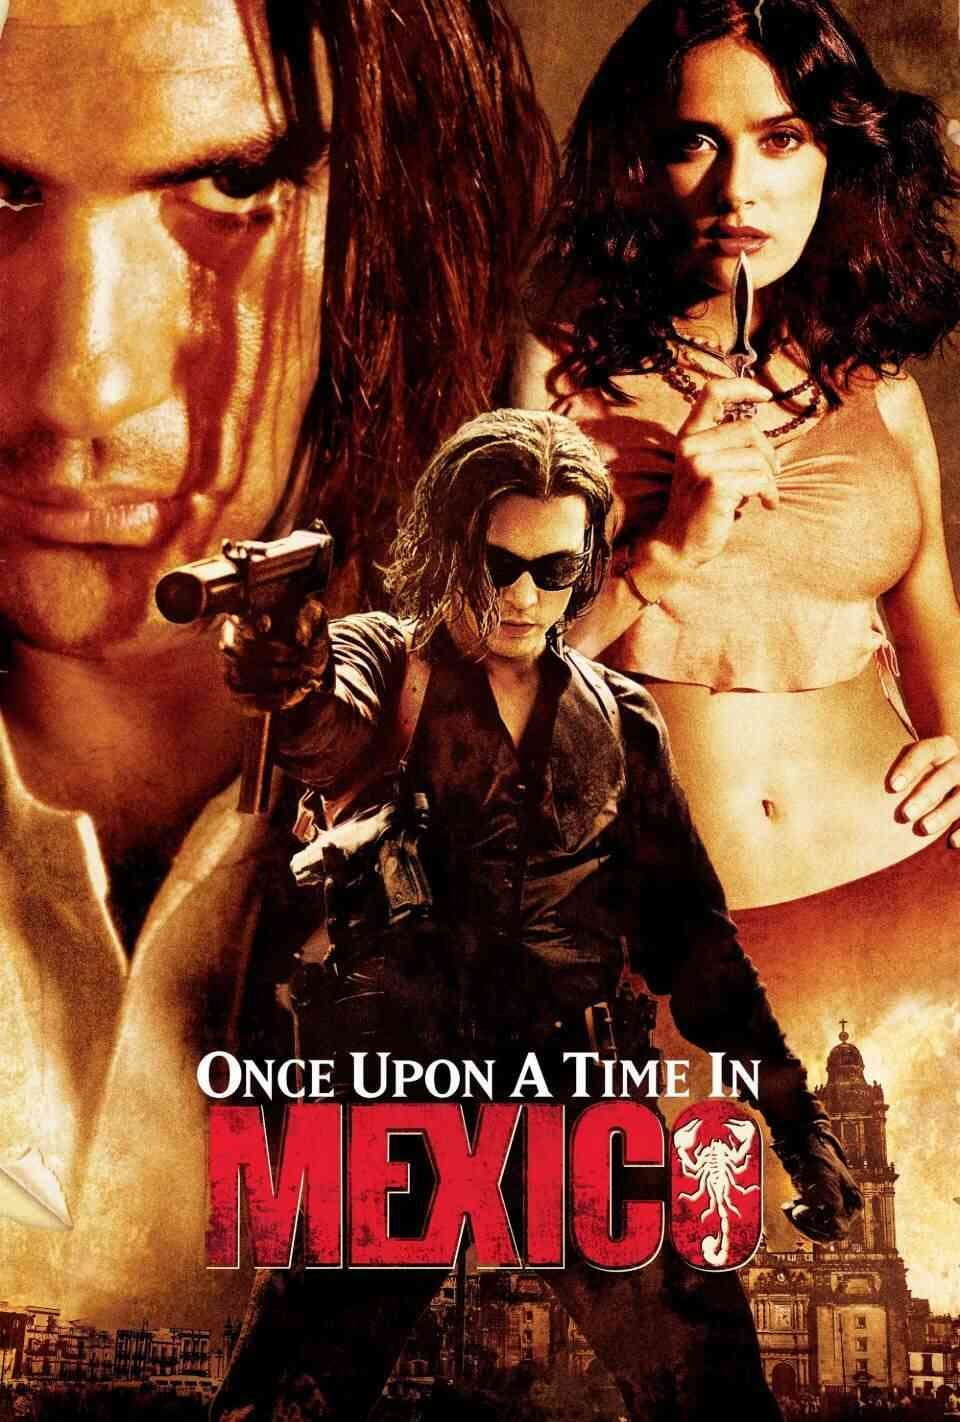 Read Once Upon a Time in Mexico screenplay (poster)